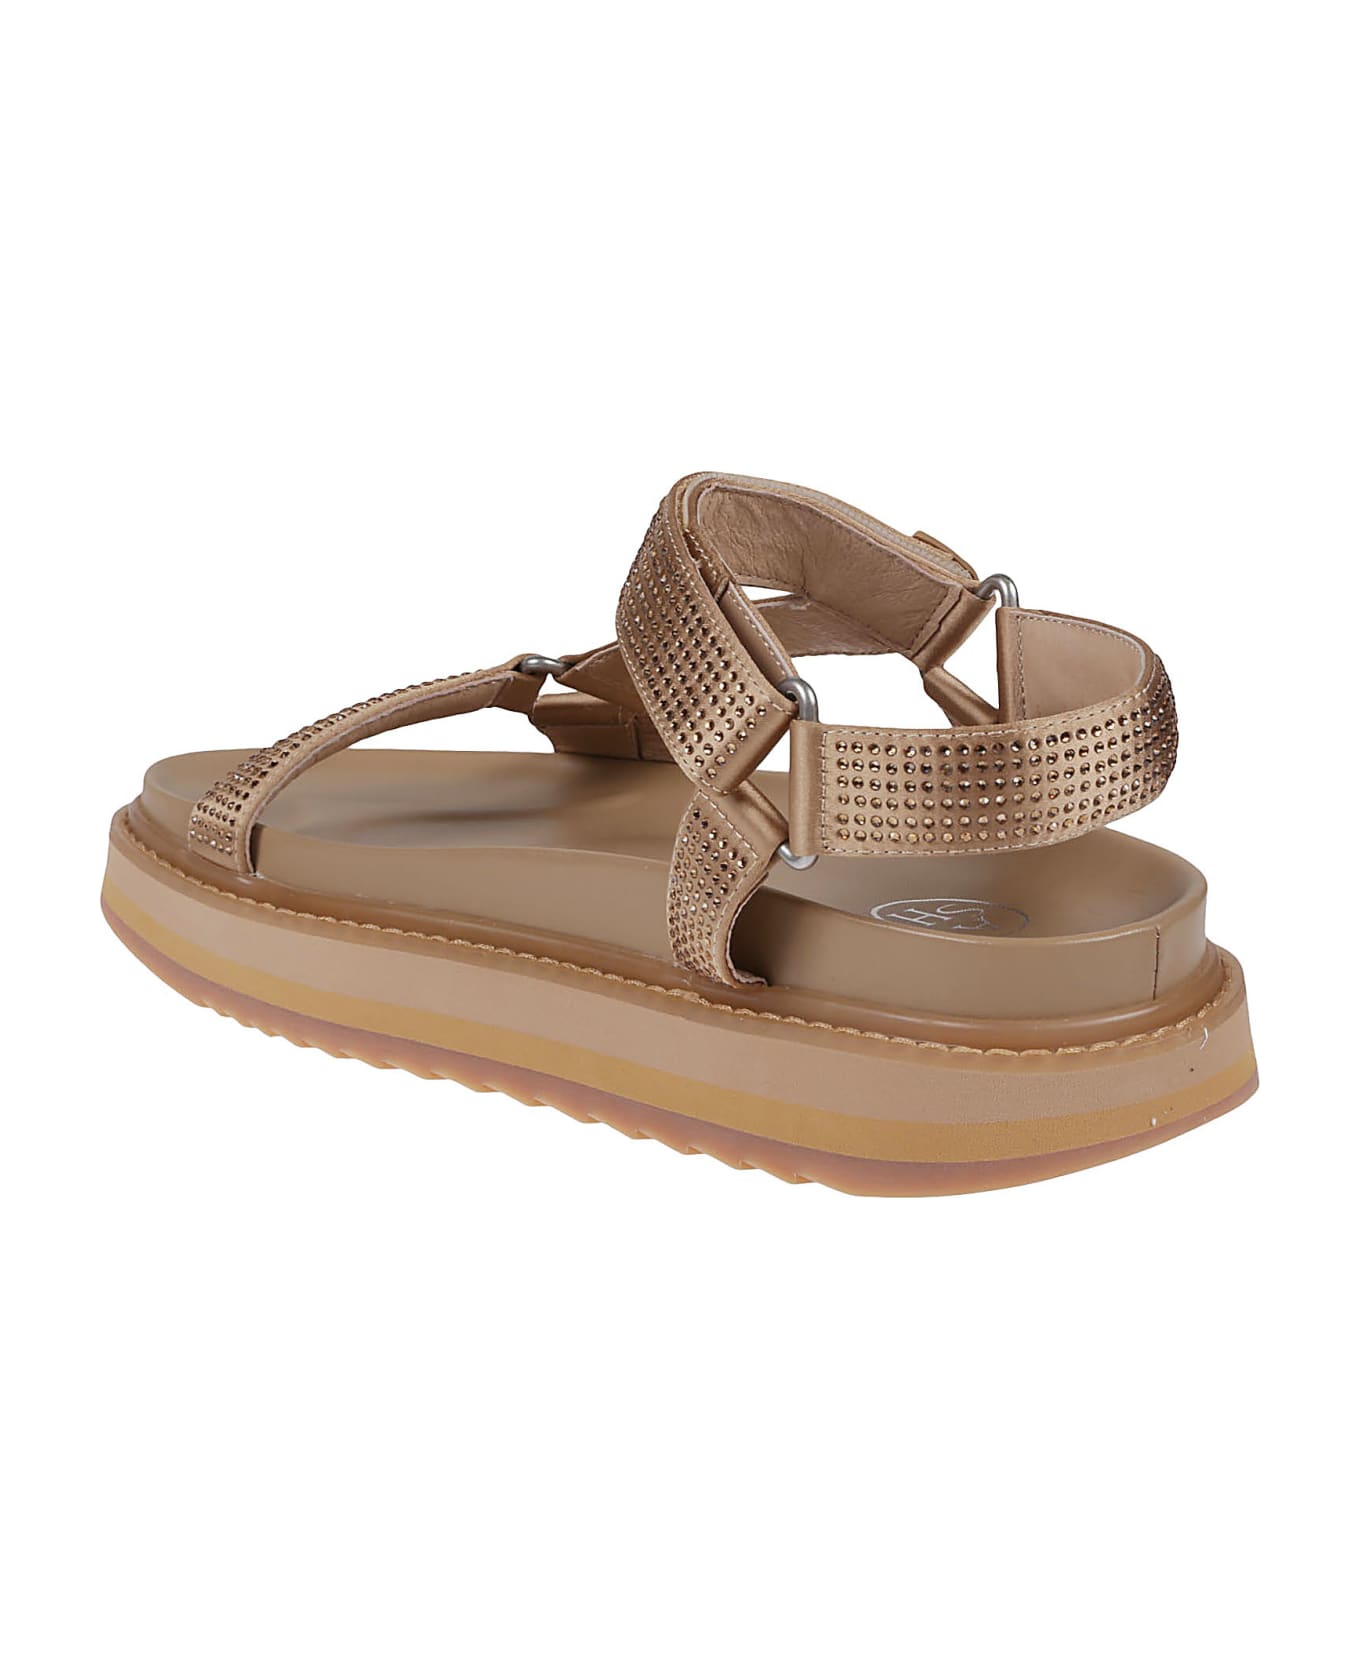 Ash Ugostrass Sandals - Nude